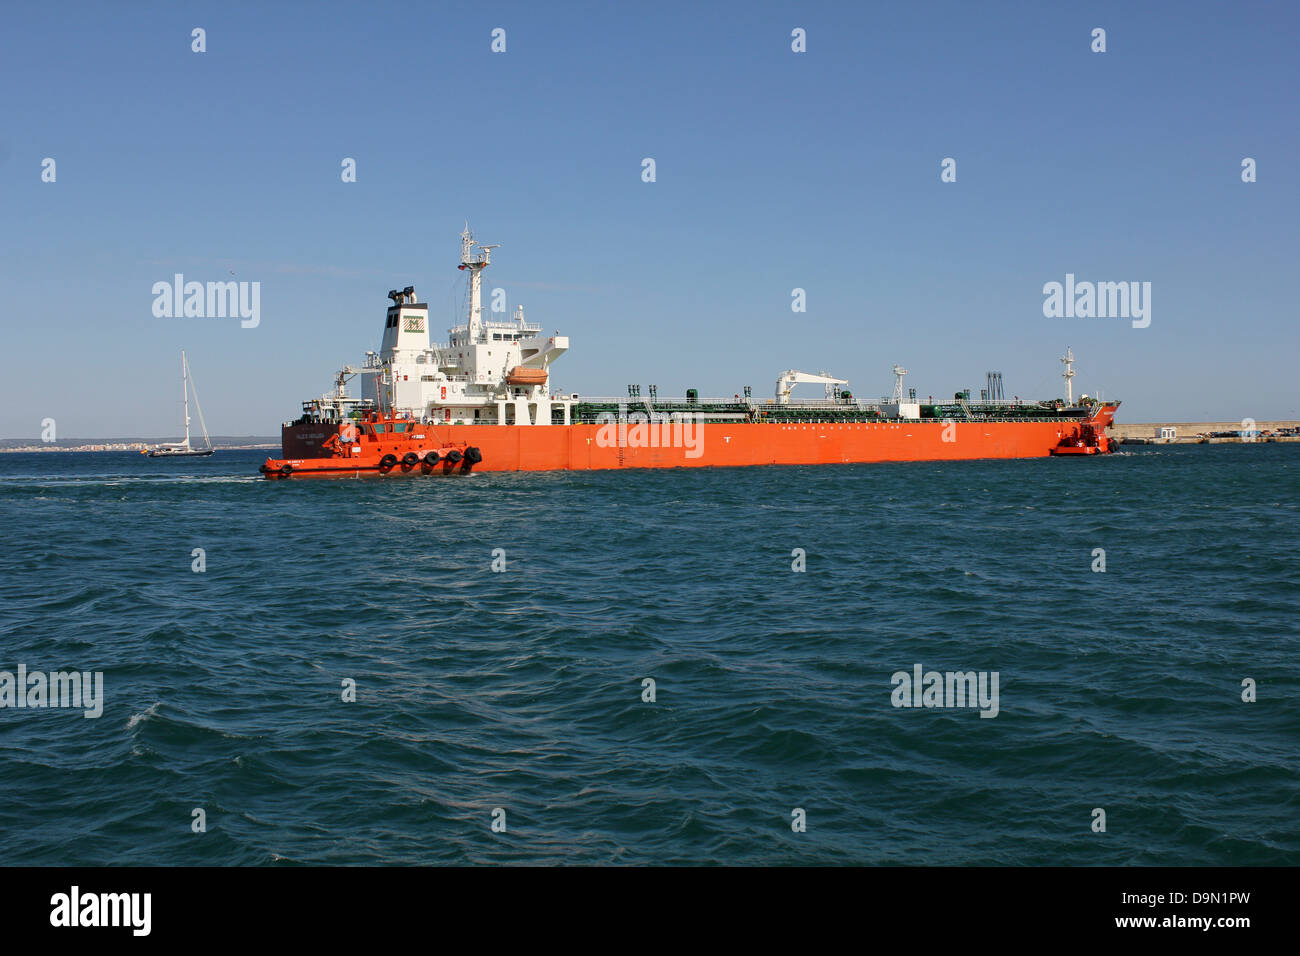 Petrolier / Petroleum product carrier “Vallee di Andalusia” entering port with tug assistance Stock Photo